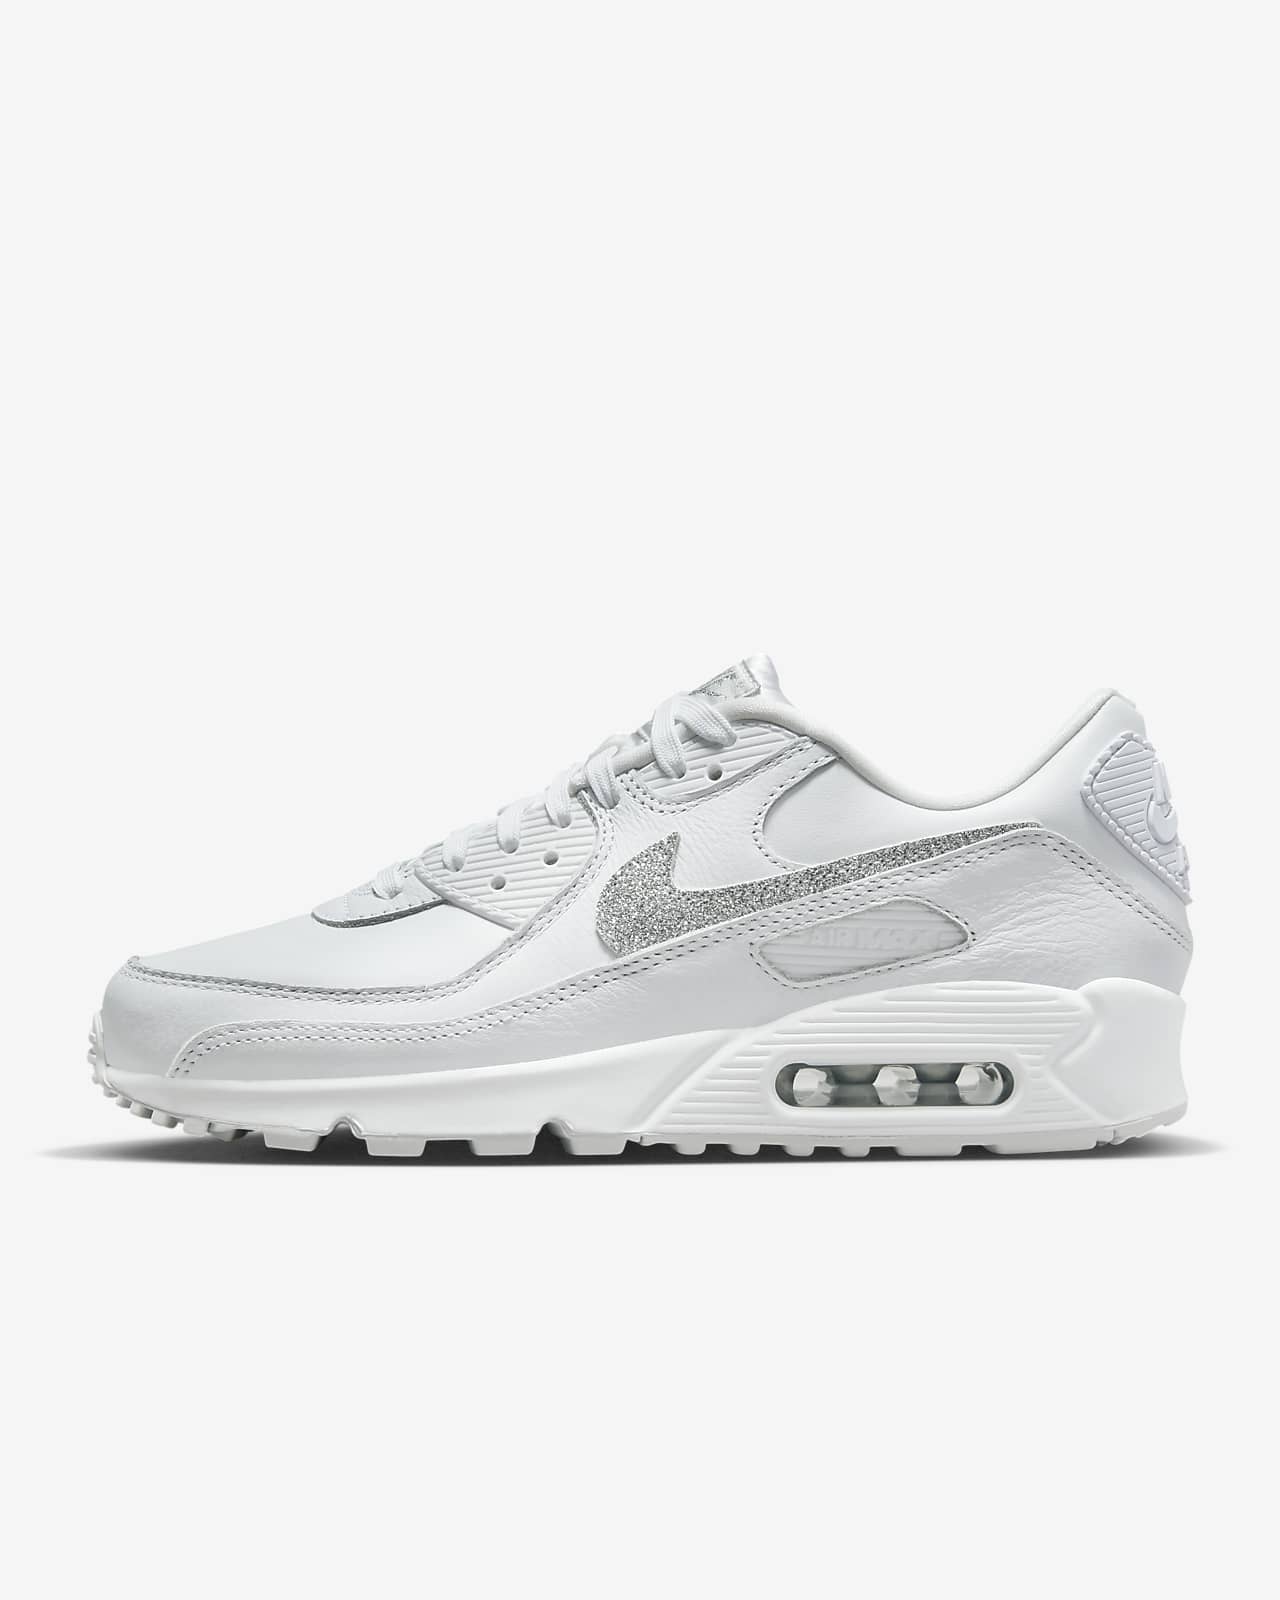 Rationel Hound kage Nike Air Max 90 SE Women's Shoes. Nike.com